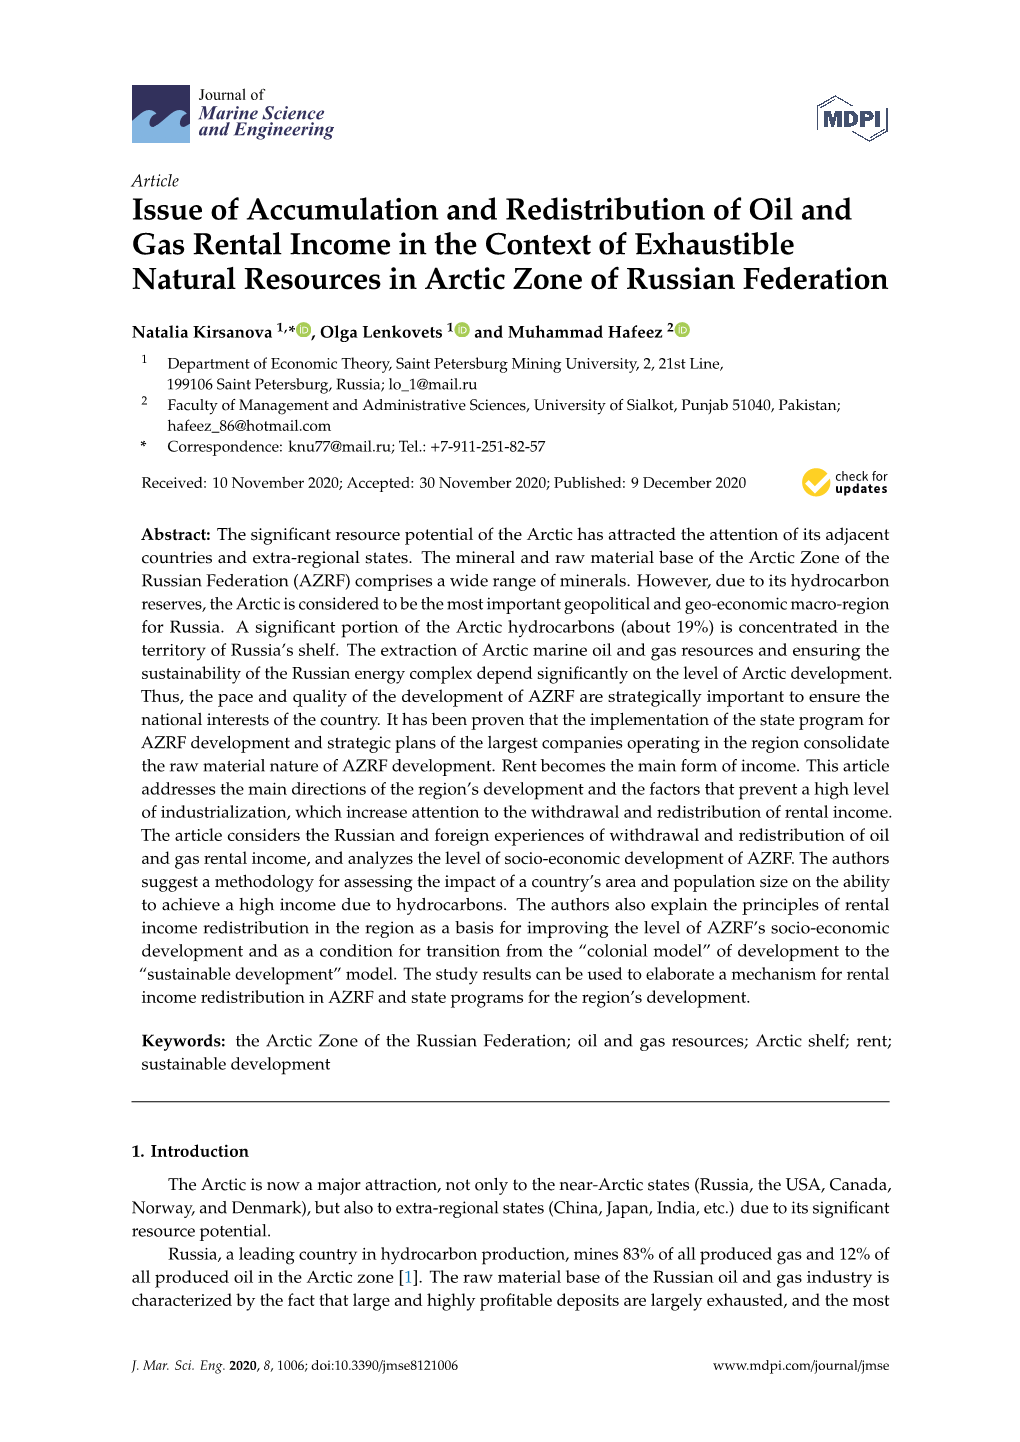 Issue of Accumulation and Redistribution of Oil and Gas Rental Income in the Context of Exhaustible Natural Resources in Arctic Zone of Russian Federation